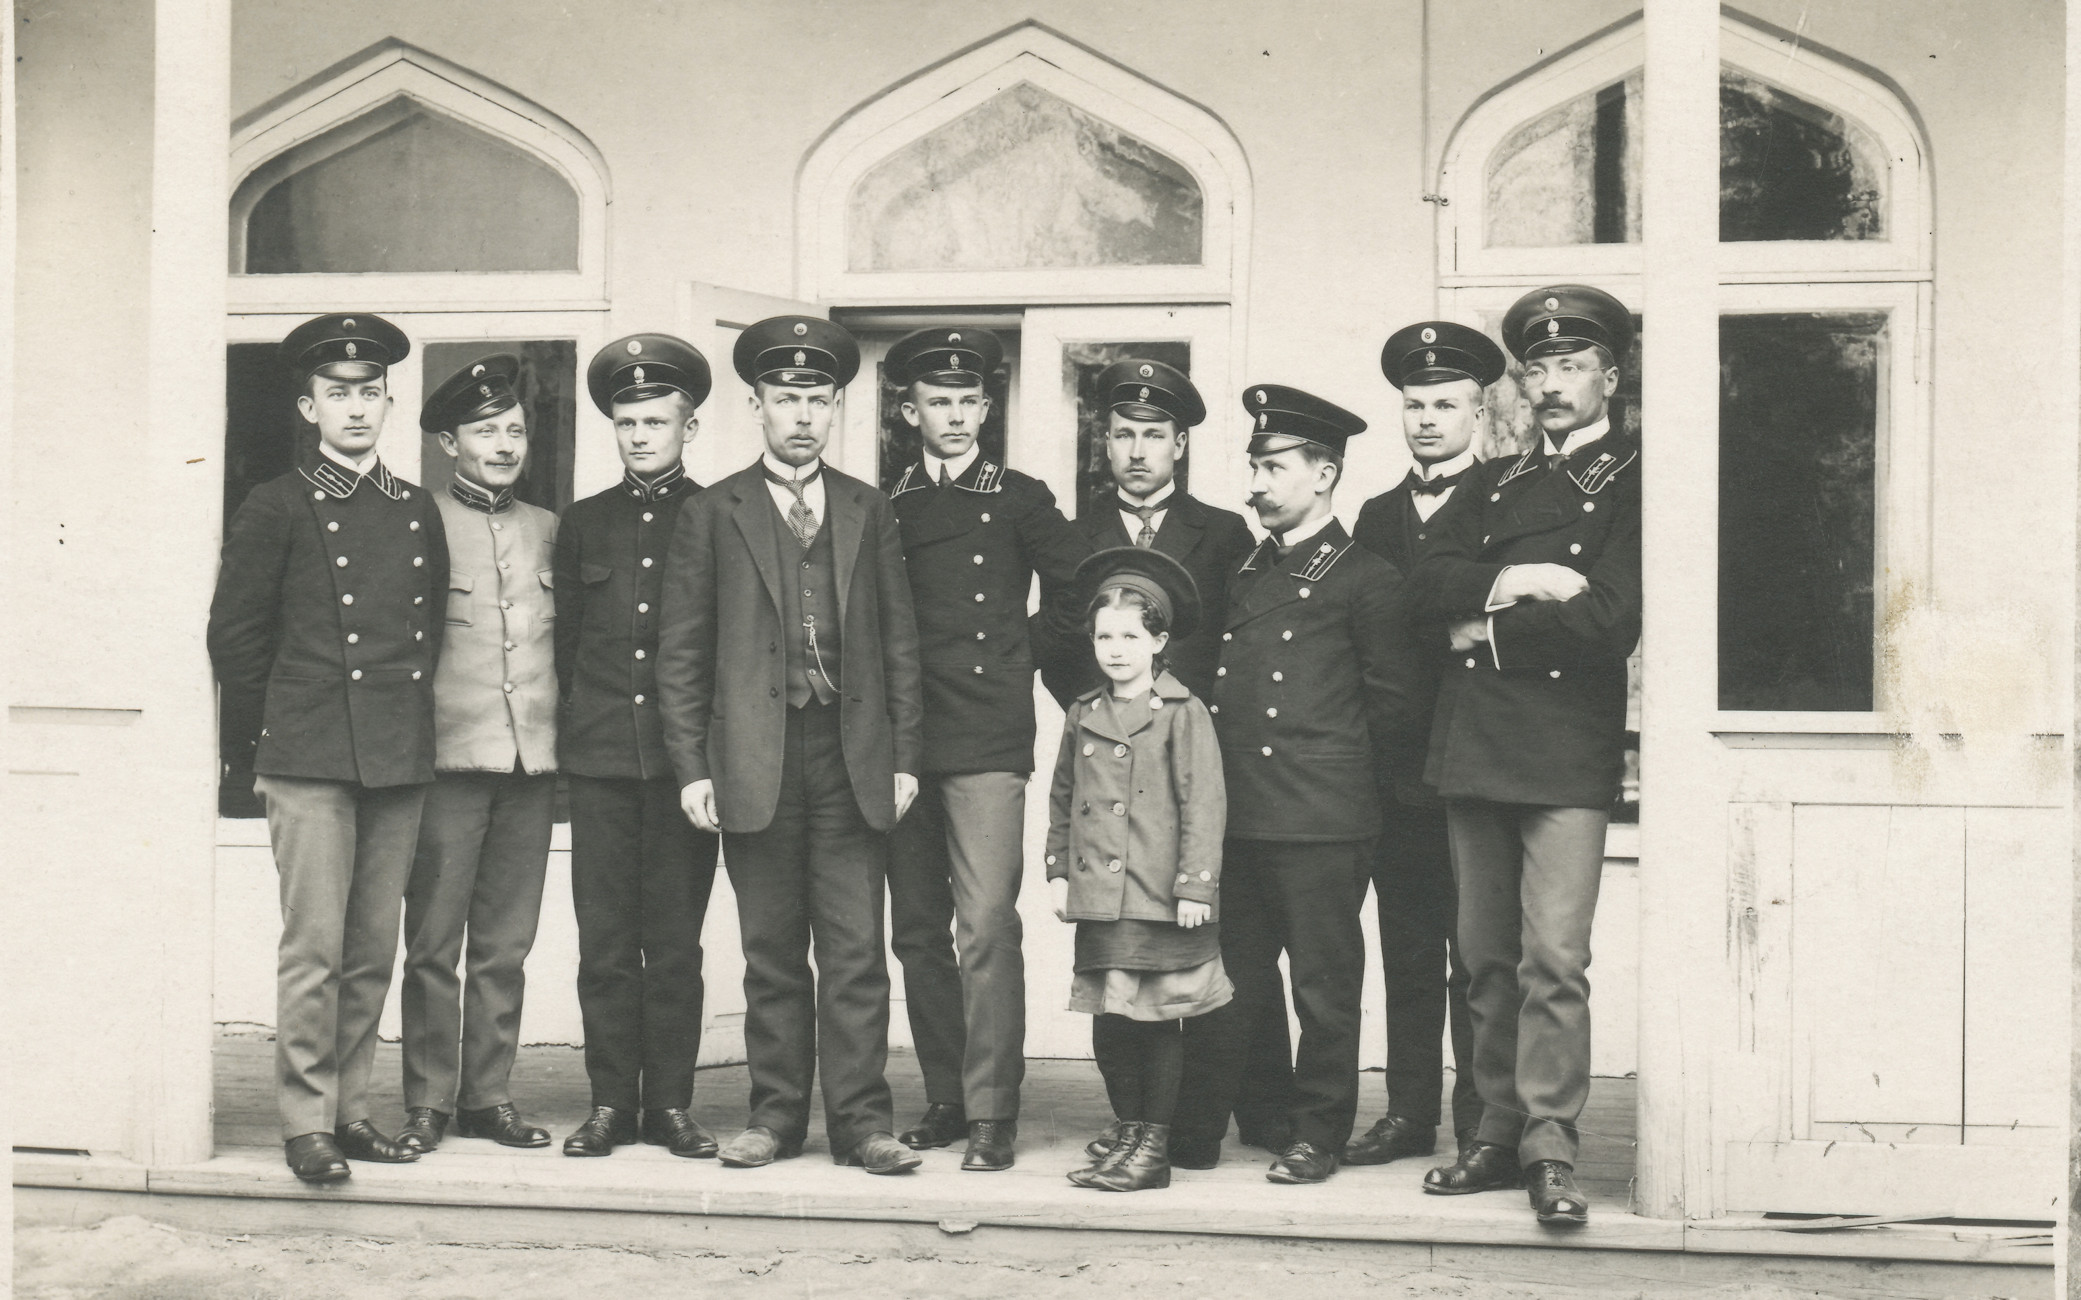 Postal workers in 1915  (on the inner courtyard porch)